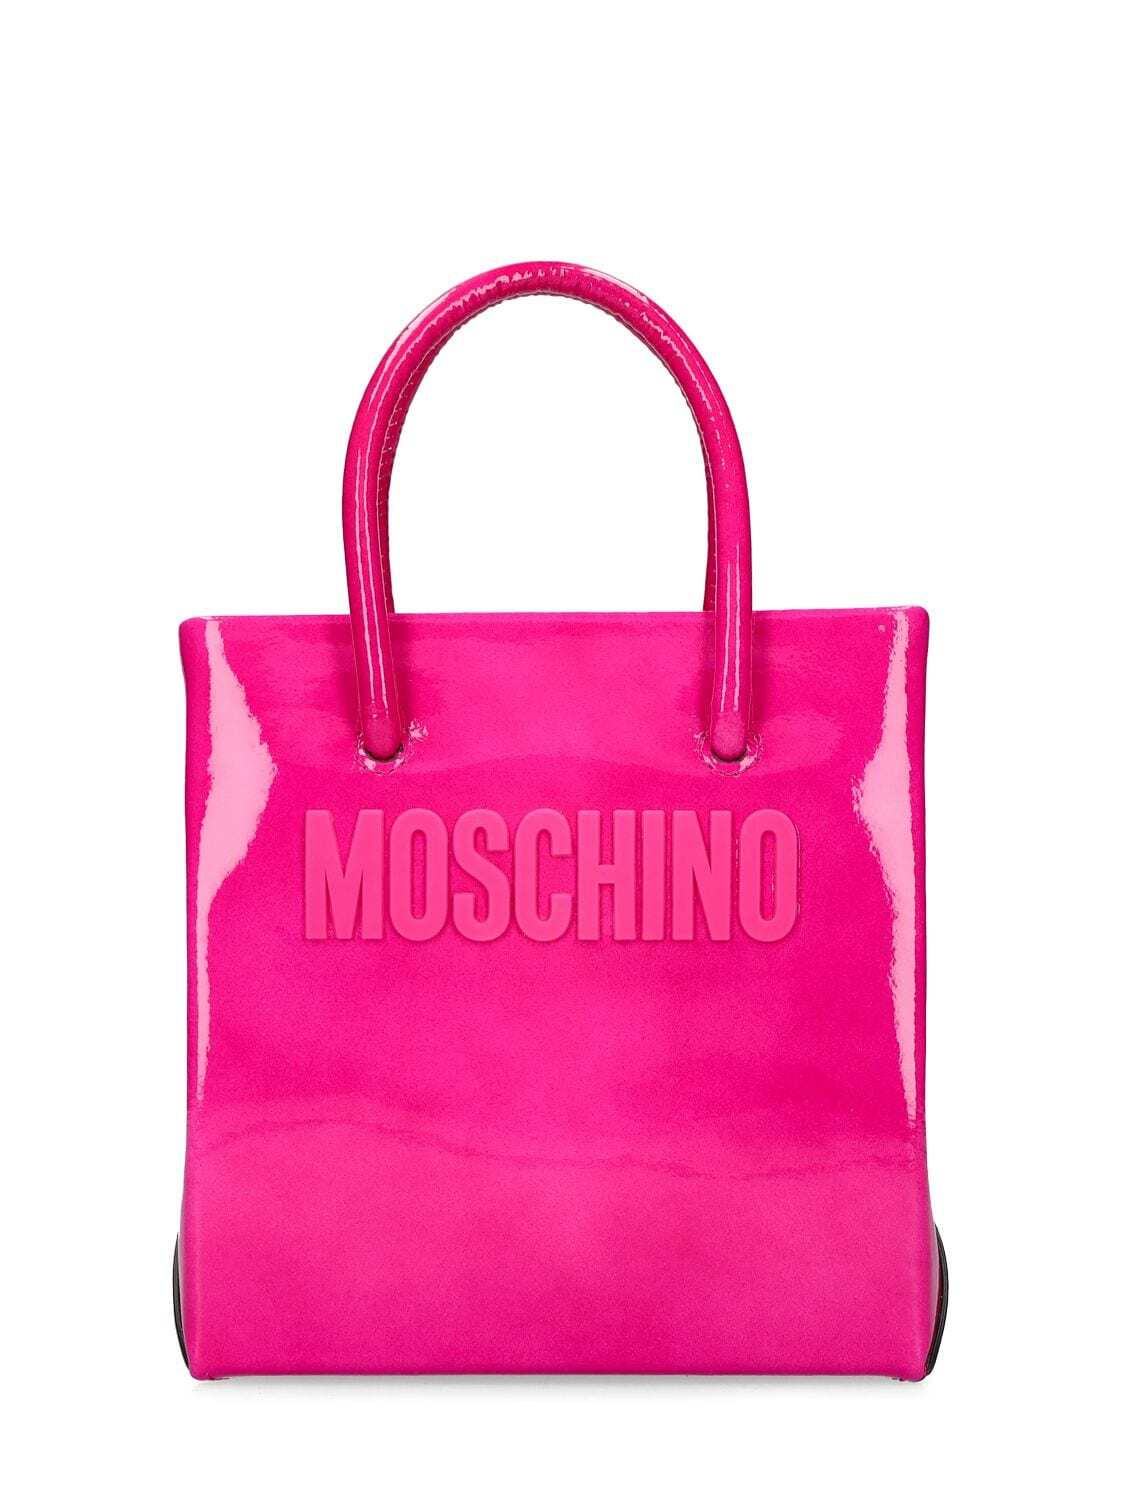 MOSCHINO Logo Patent Leather Top Handle Bag in purple